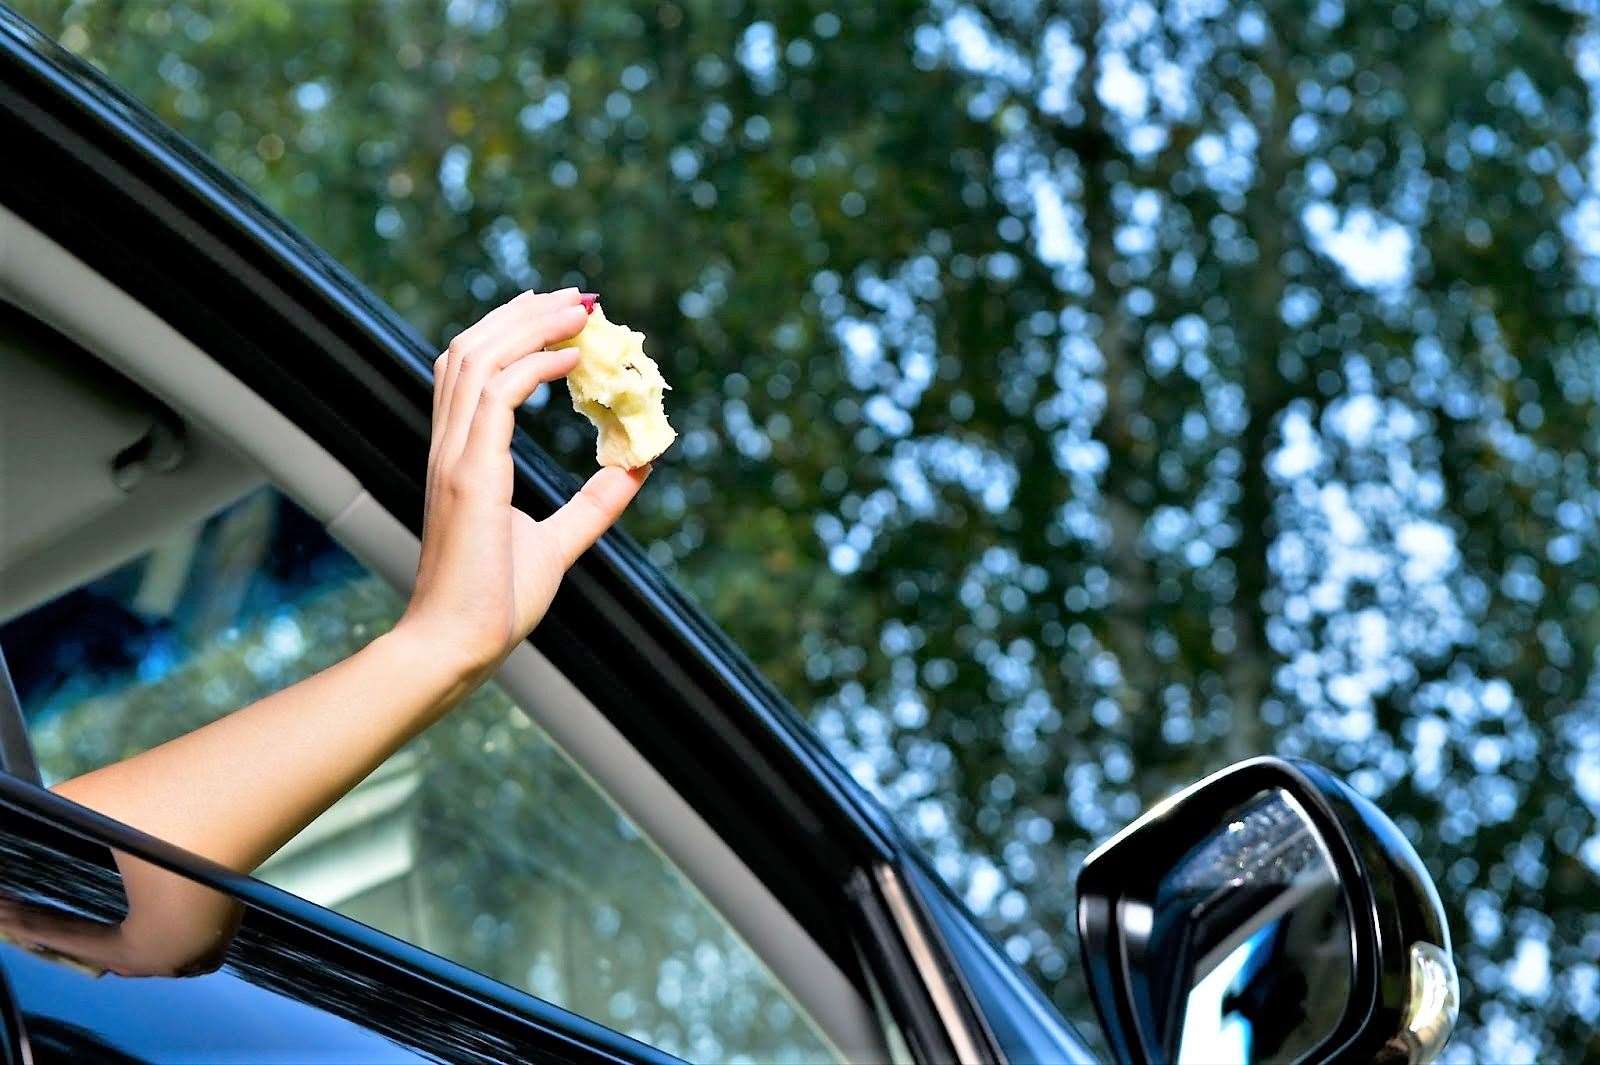 You can be fined for throwing an apple core out your car window when driving. Picture: Shutterstock